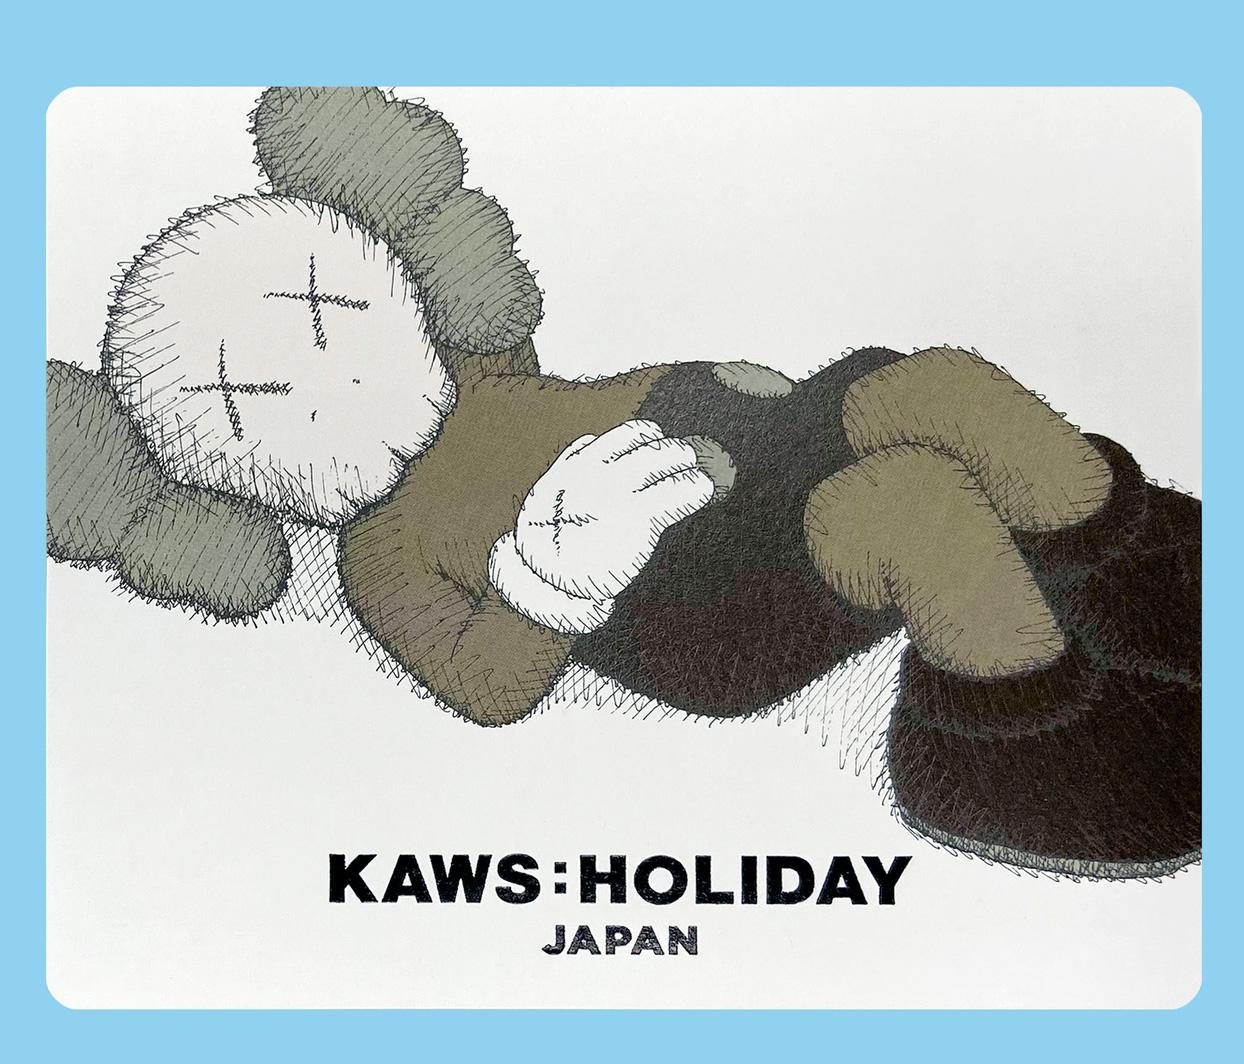 KAWS Mount Fuji Plush Companion: 
This sold out limited edition, plush figure was produced in conjunction with KAWS’ widely popular, traveling art installation, ‘Holiday' - this time at Mt. Fuji, Japan. New in an exclusive KAWS designed